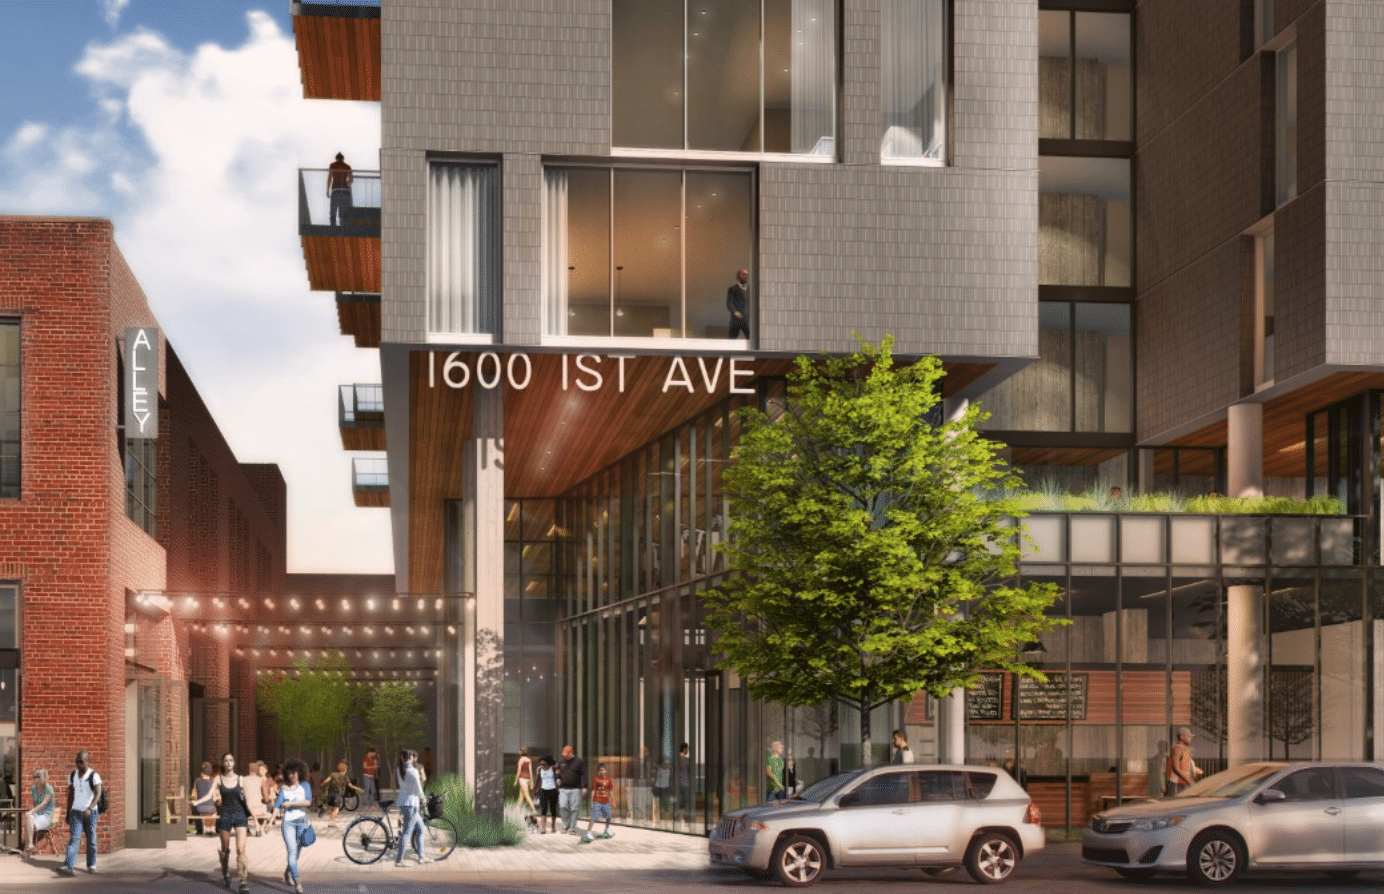 The swanky 140-room boutique hotel will be located at 1600 1st Avenue in Parkside. Photo submitted